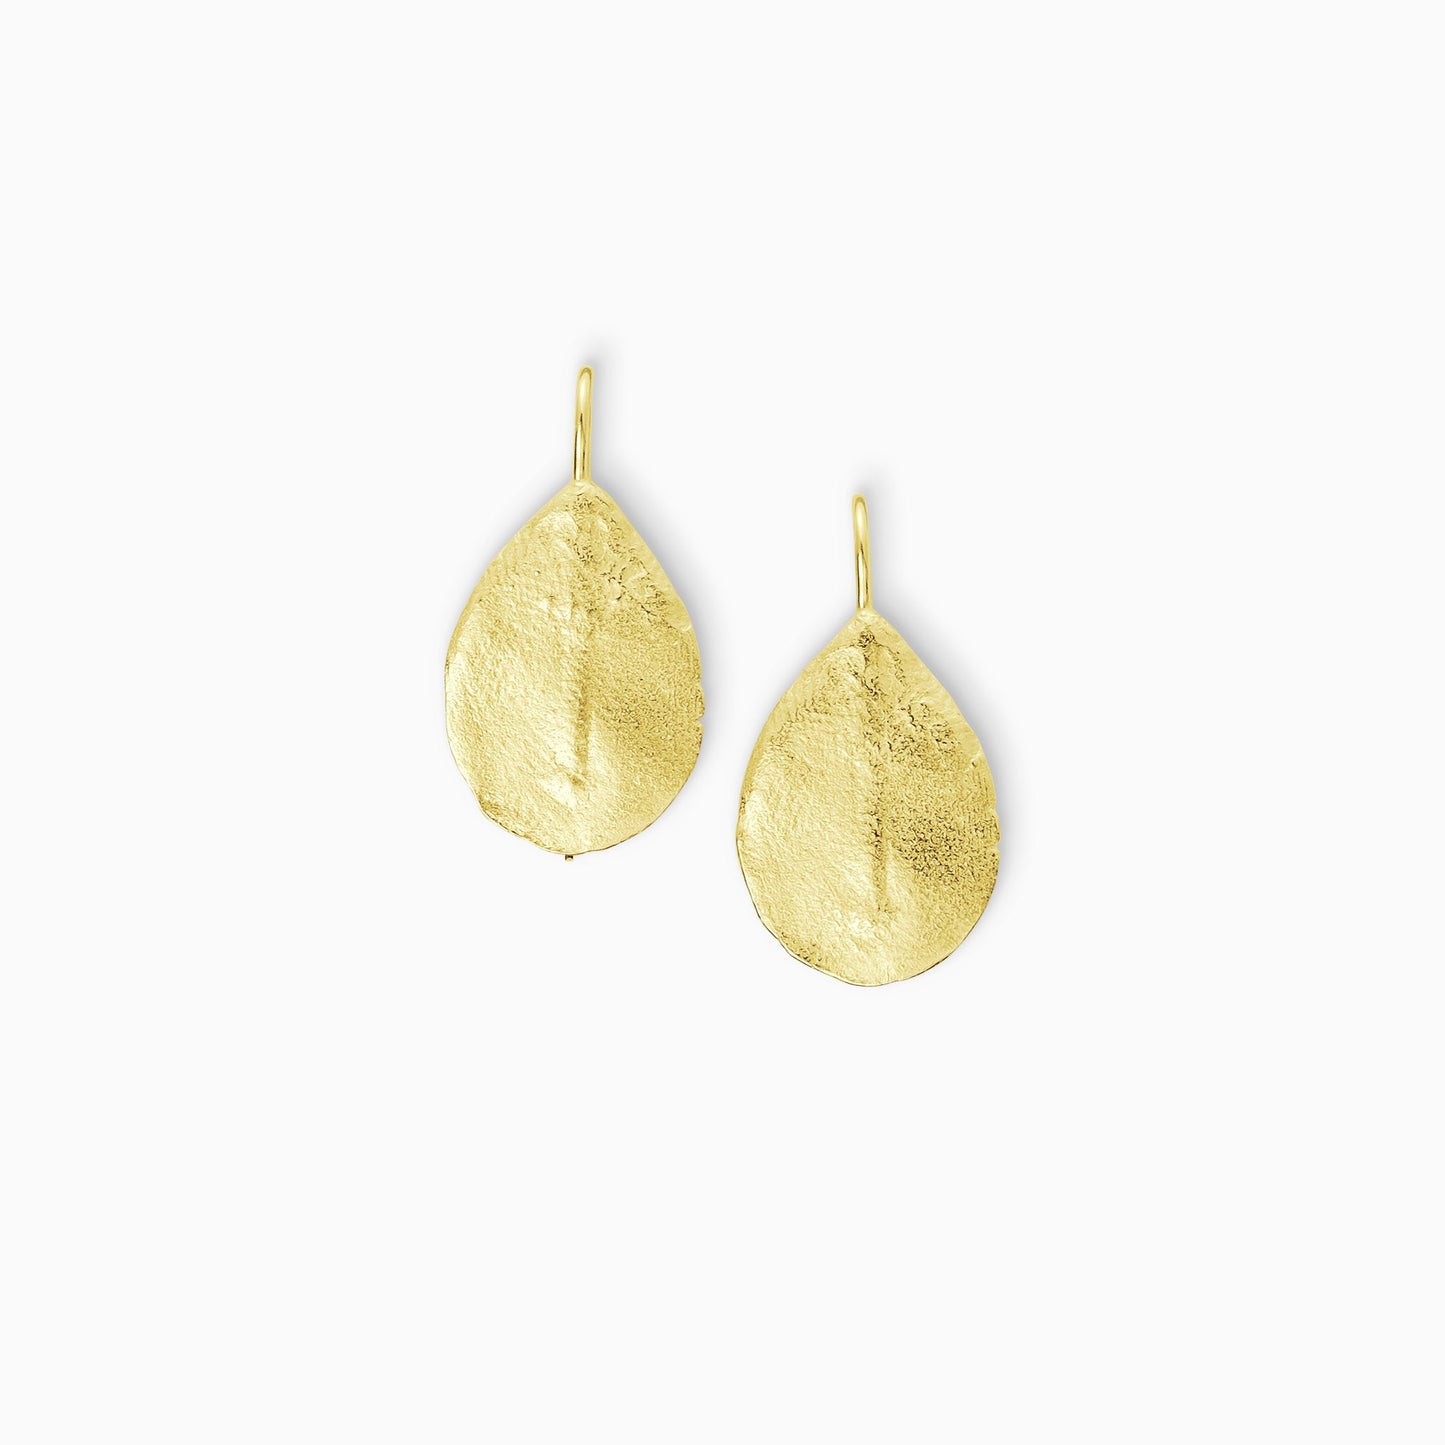 A pair of 18ct Fairtrade yellow gold textured earrings in the shape of a leaf with a hook fastening. 28mm length, 15mm width